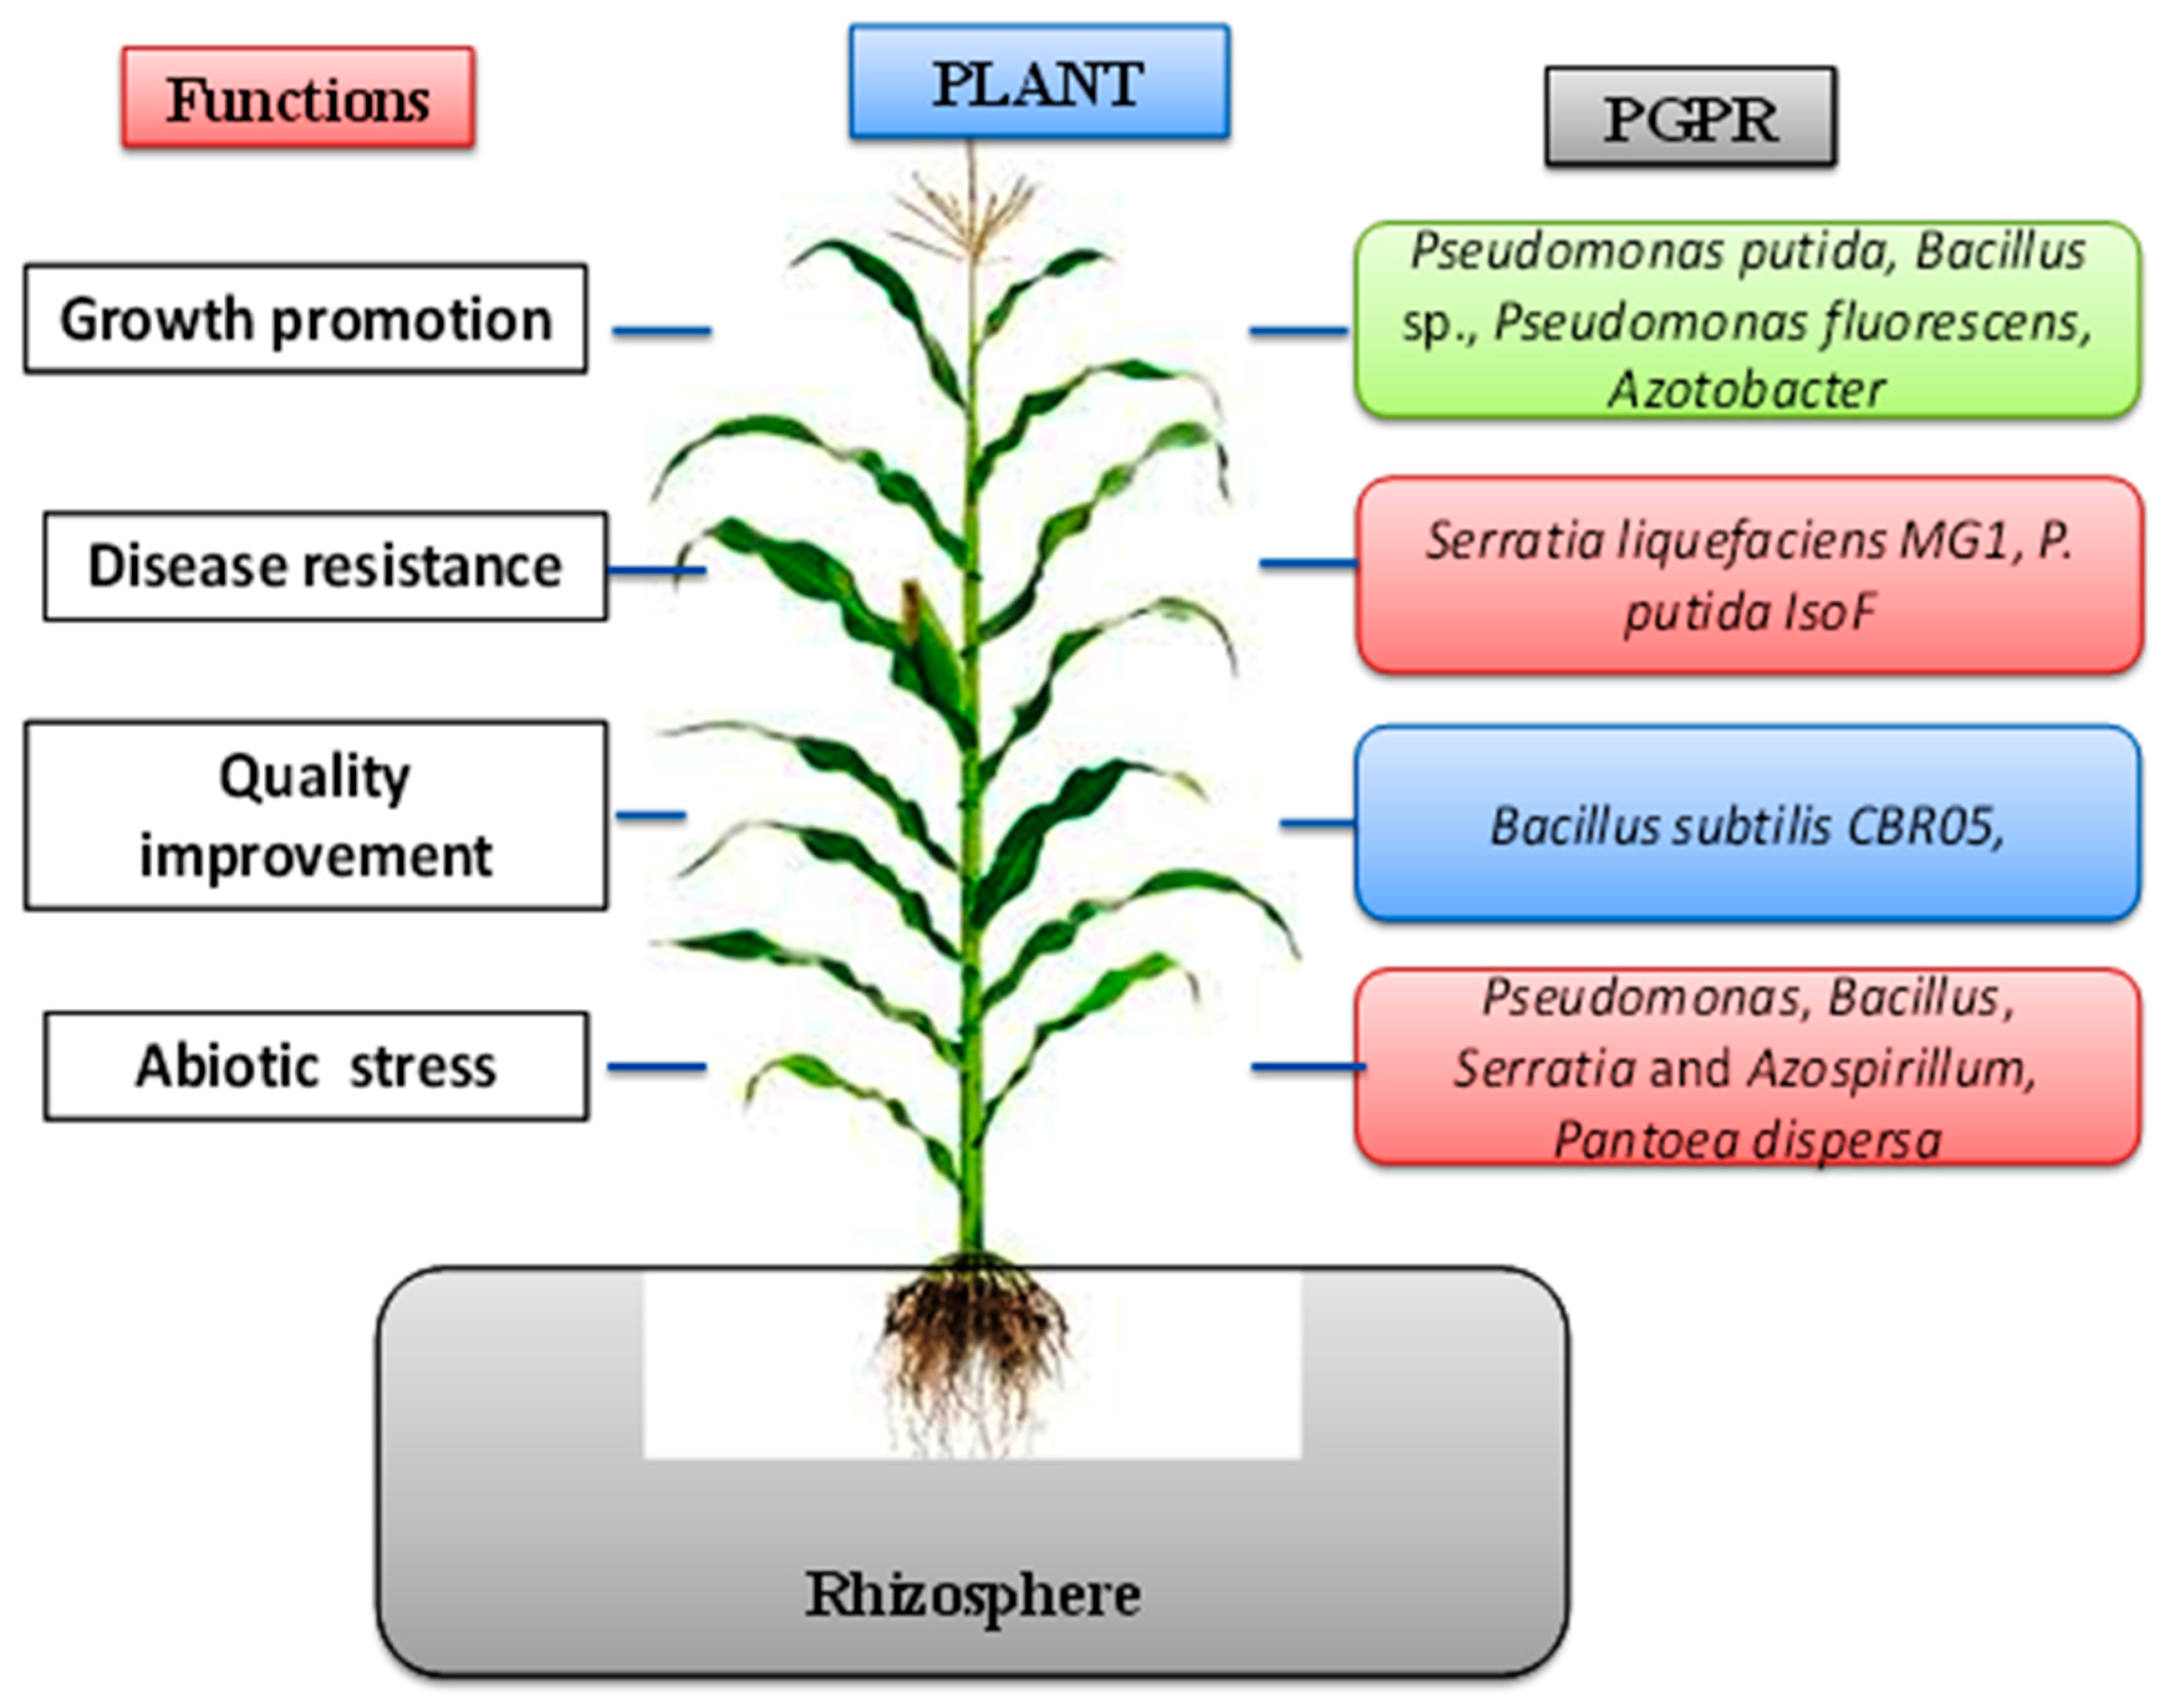 II. Understanding the Role of Beneficial Bacteria in Plant Growth